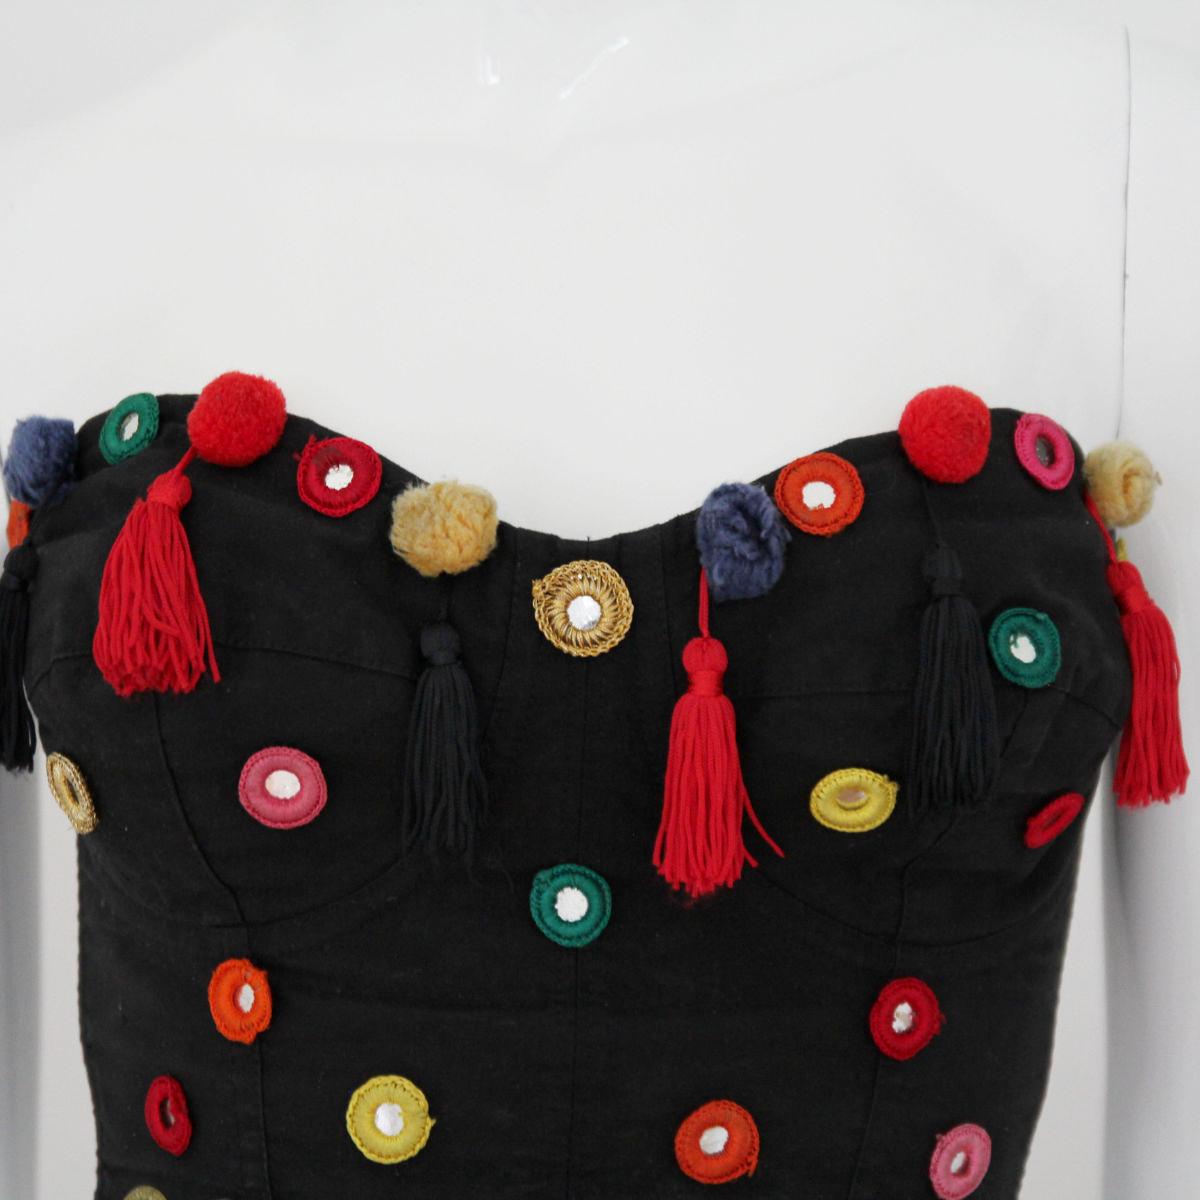 DOLCE & GABBANA

1990s. Extraordinary bustier / corsage by Dolce & Gabbana with small mirrors and tassels.

An absolute collector's item. Buy Now Or Cry Later!

The bustier is in good condition (see photos).
Light wear to the hardware.